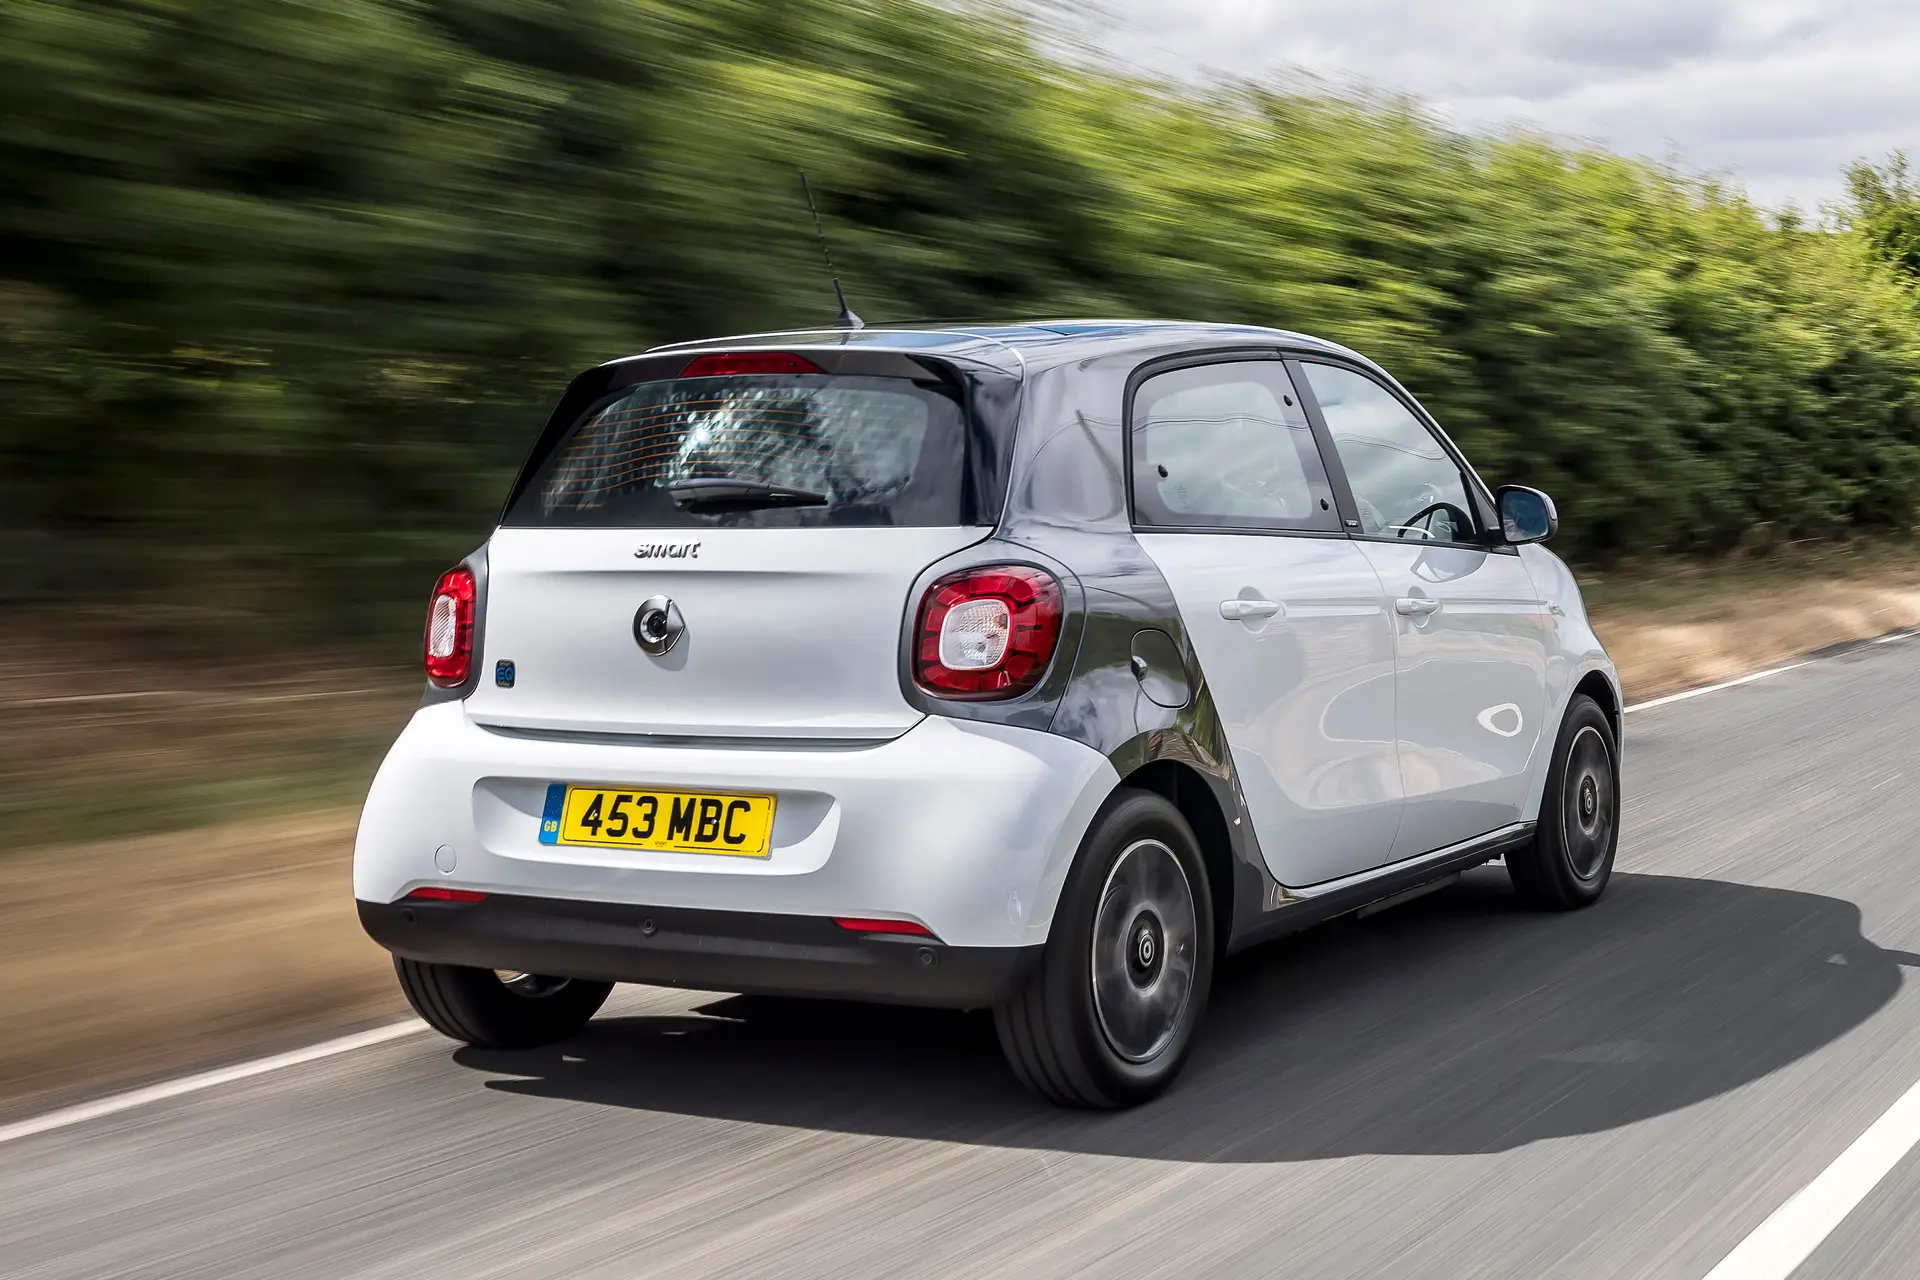 Smart EQ ForFour Production Comes To An End